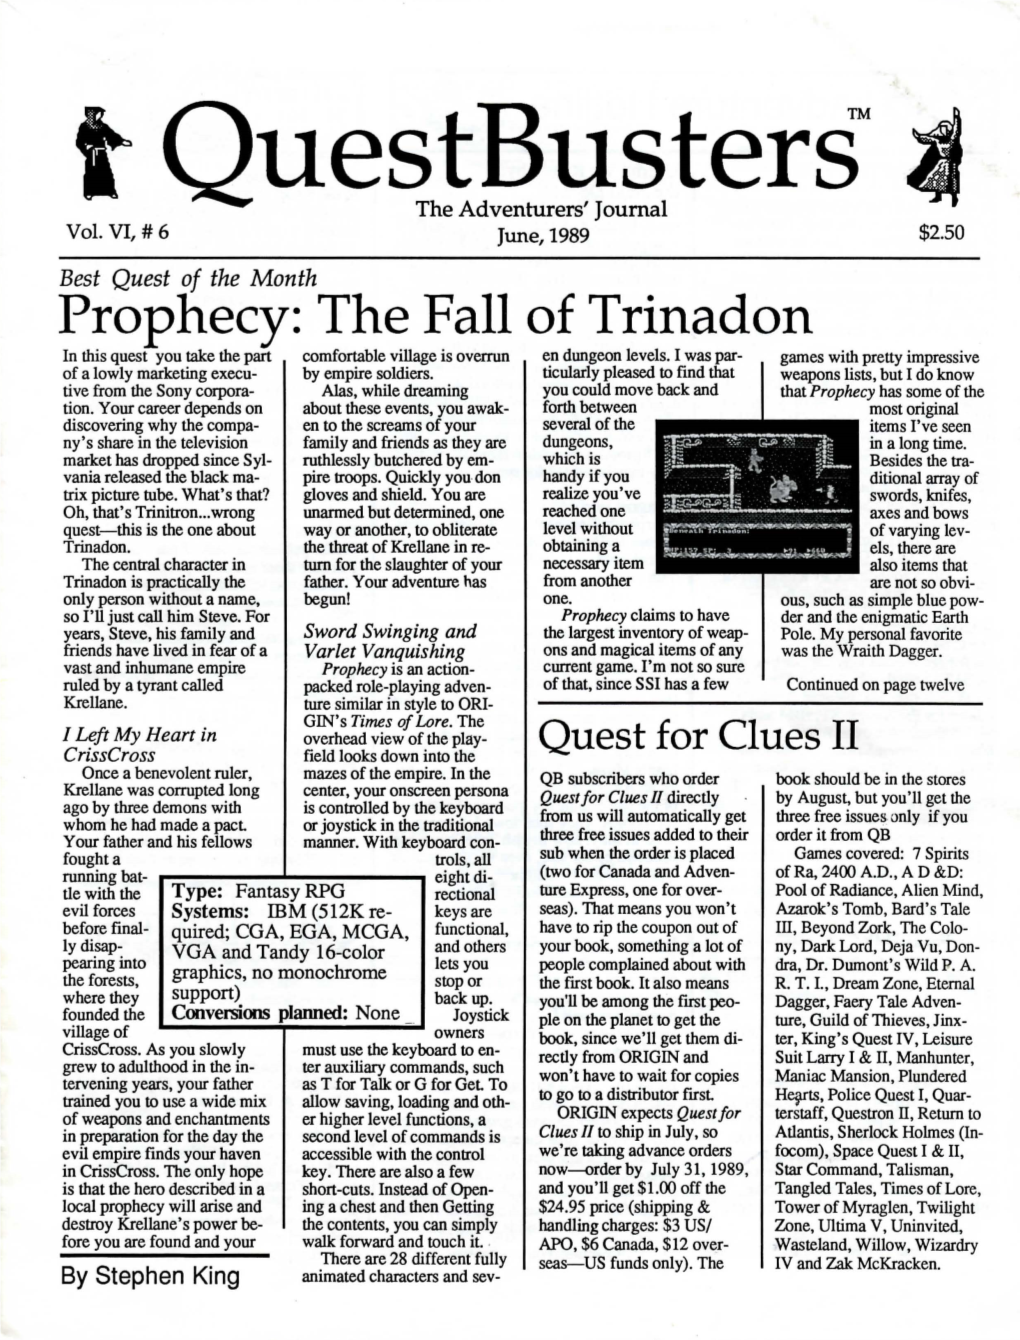 Prophecy: the Fall of Trinadon in This Quest You Take the Part Comfortable Village Is Overrun En Dungeon Levels